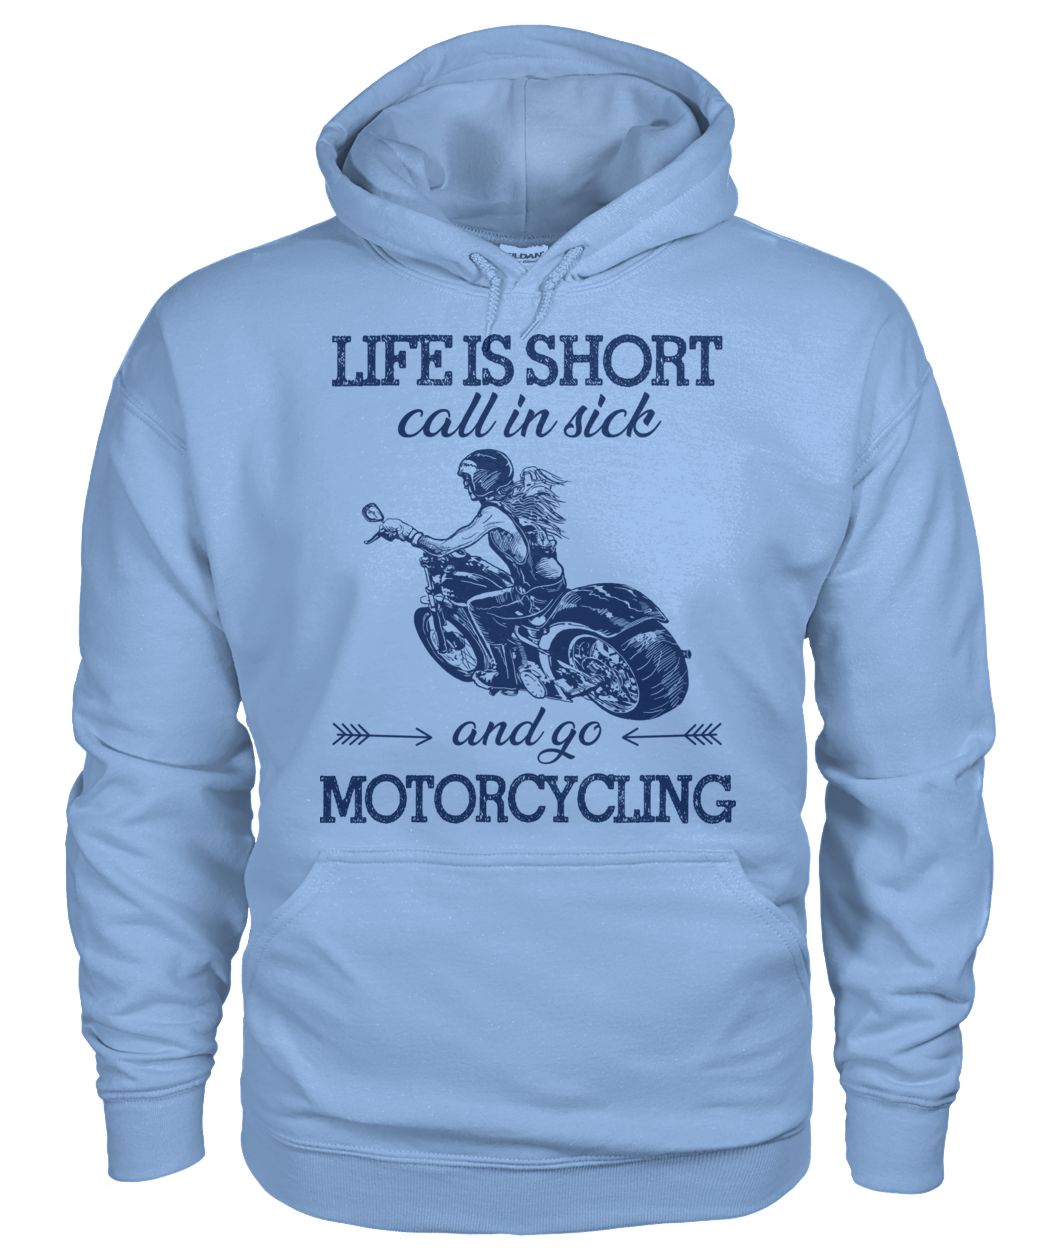 Life is short call in sick and go motorcycling gildan hoodie